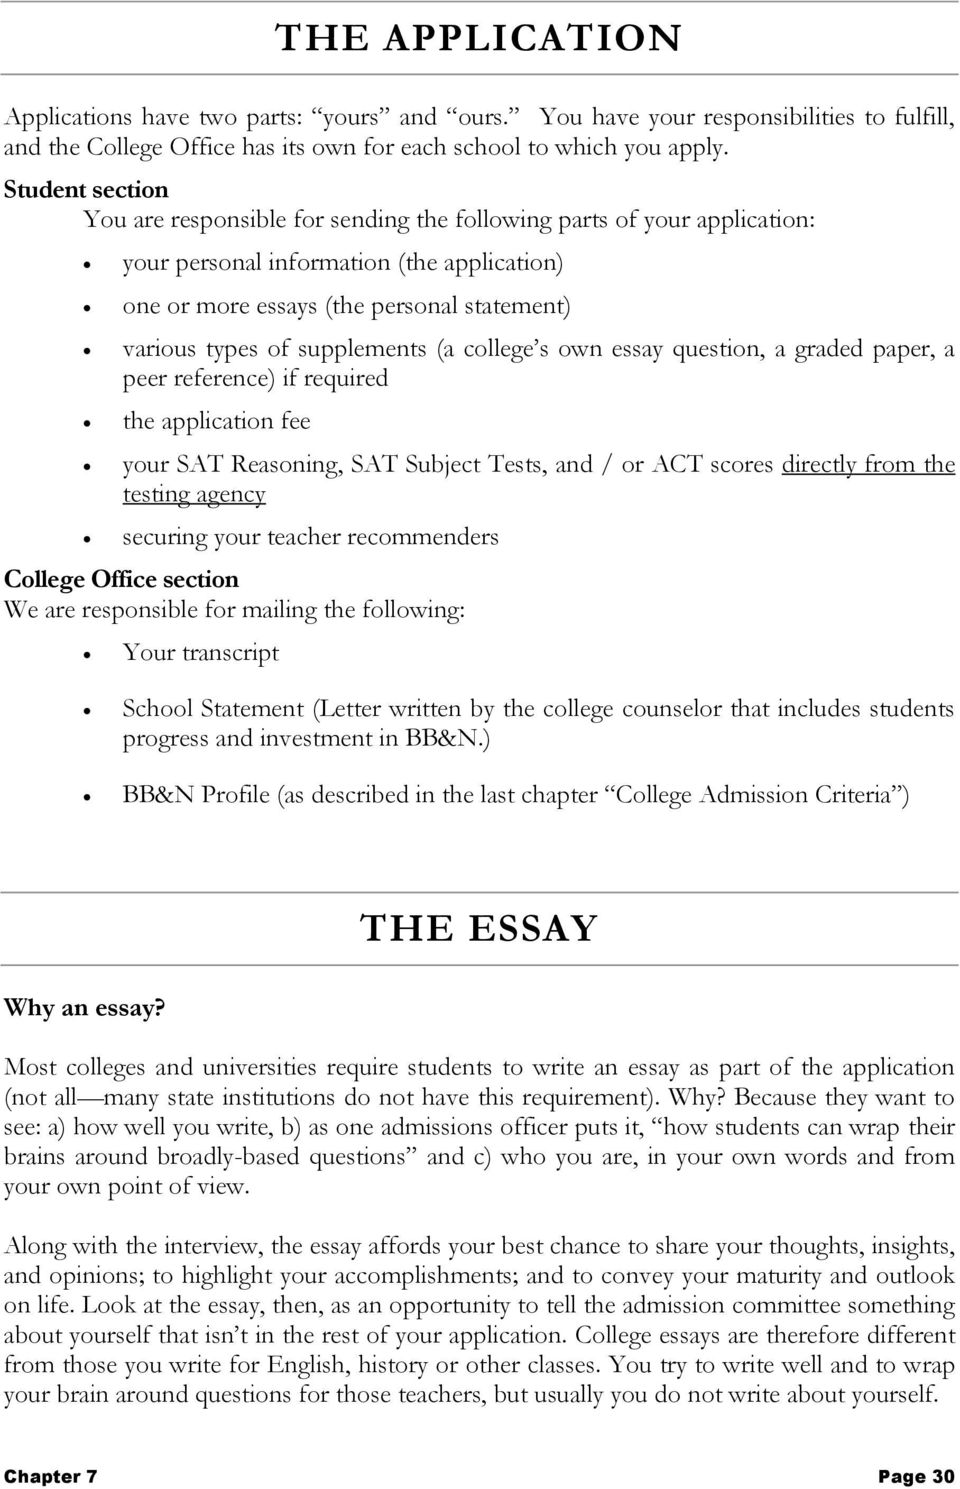 supplements (a college s own essay question, a graded paper, a peer reference) if required the application fee your SAT Reasoning, SAT Subject Tests, and / or ACT scores directly from the testing